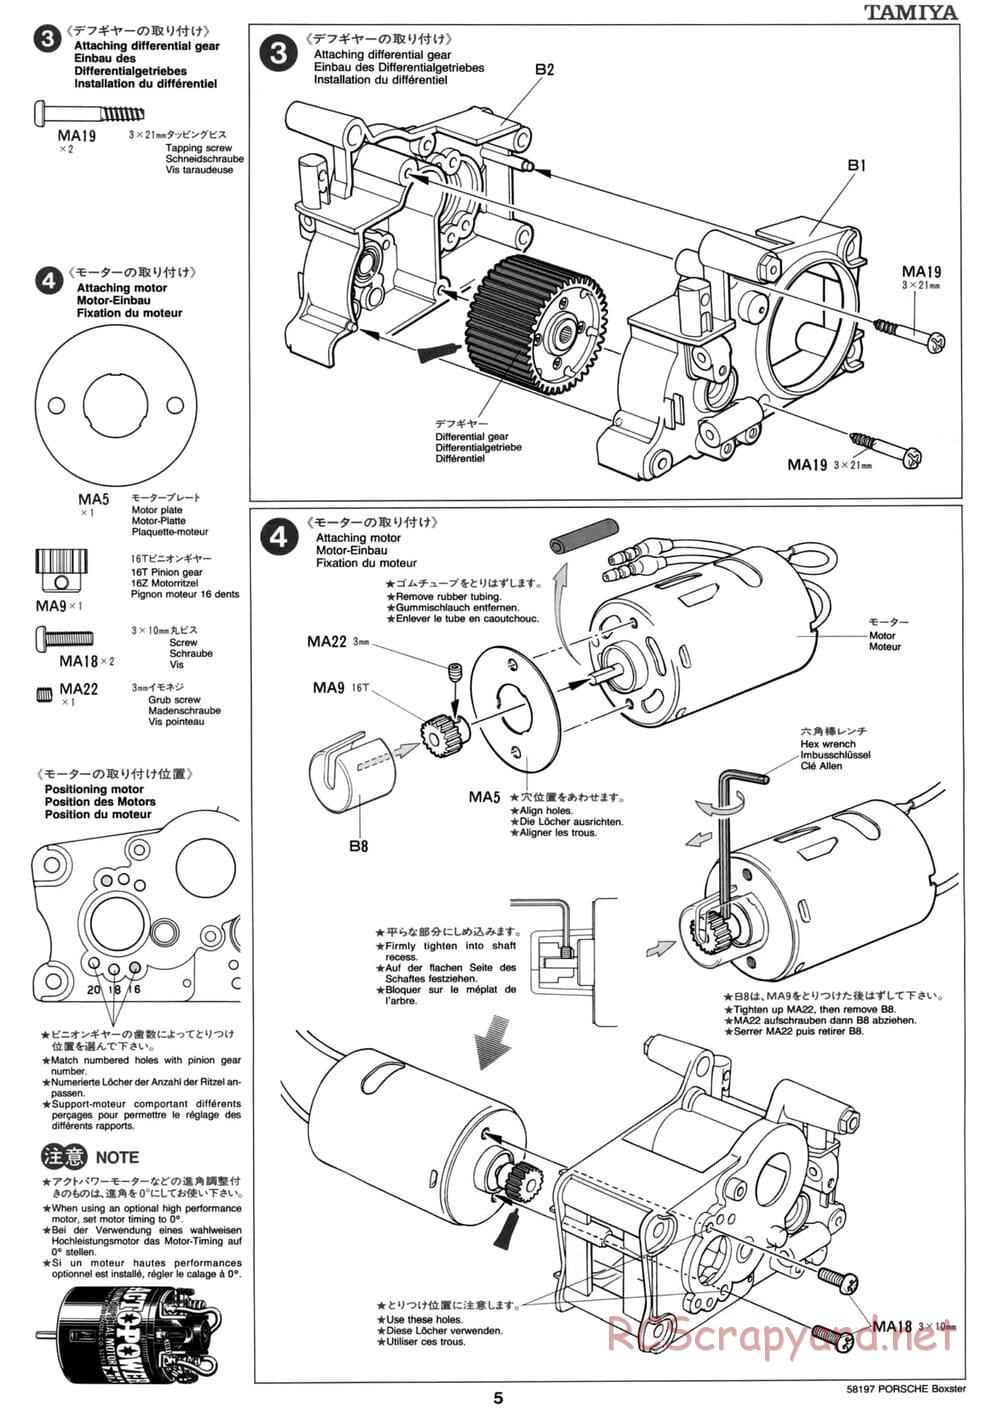 Tamiya - Porsche Boxster - M02L Chassis - Manual - Page 5